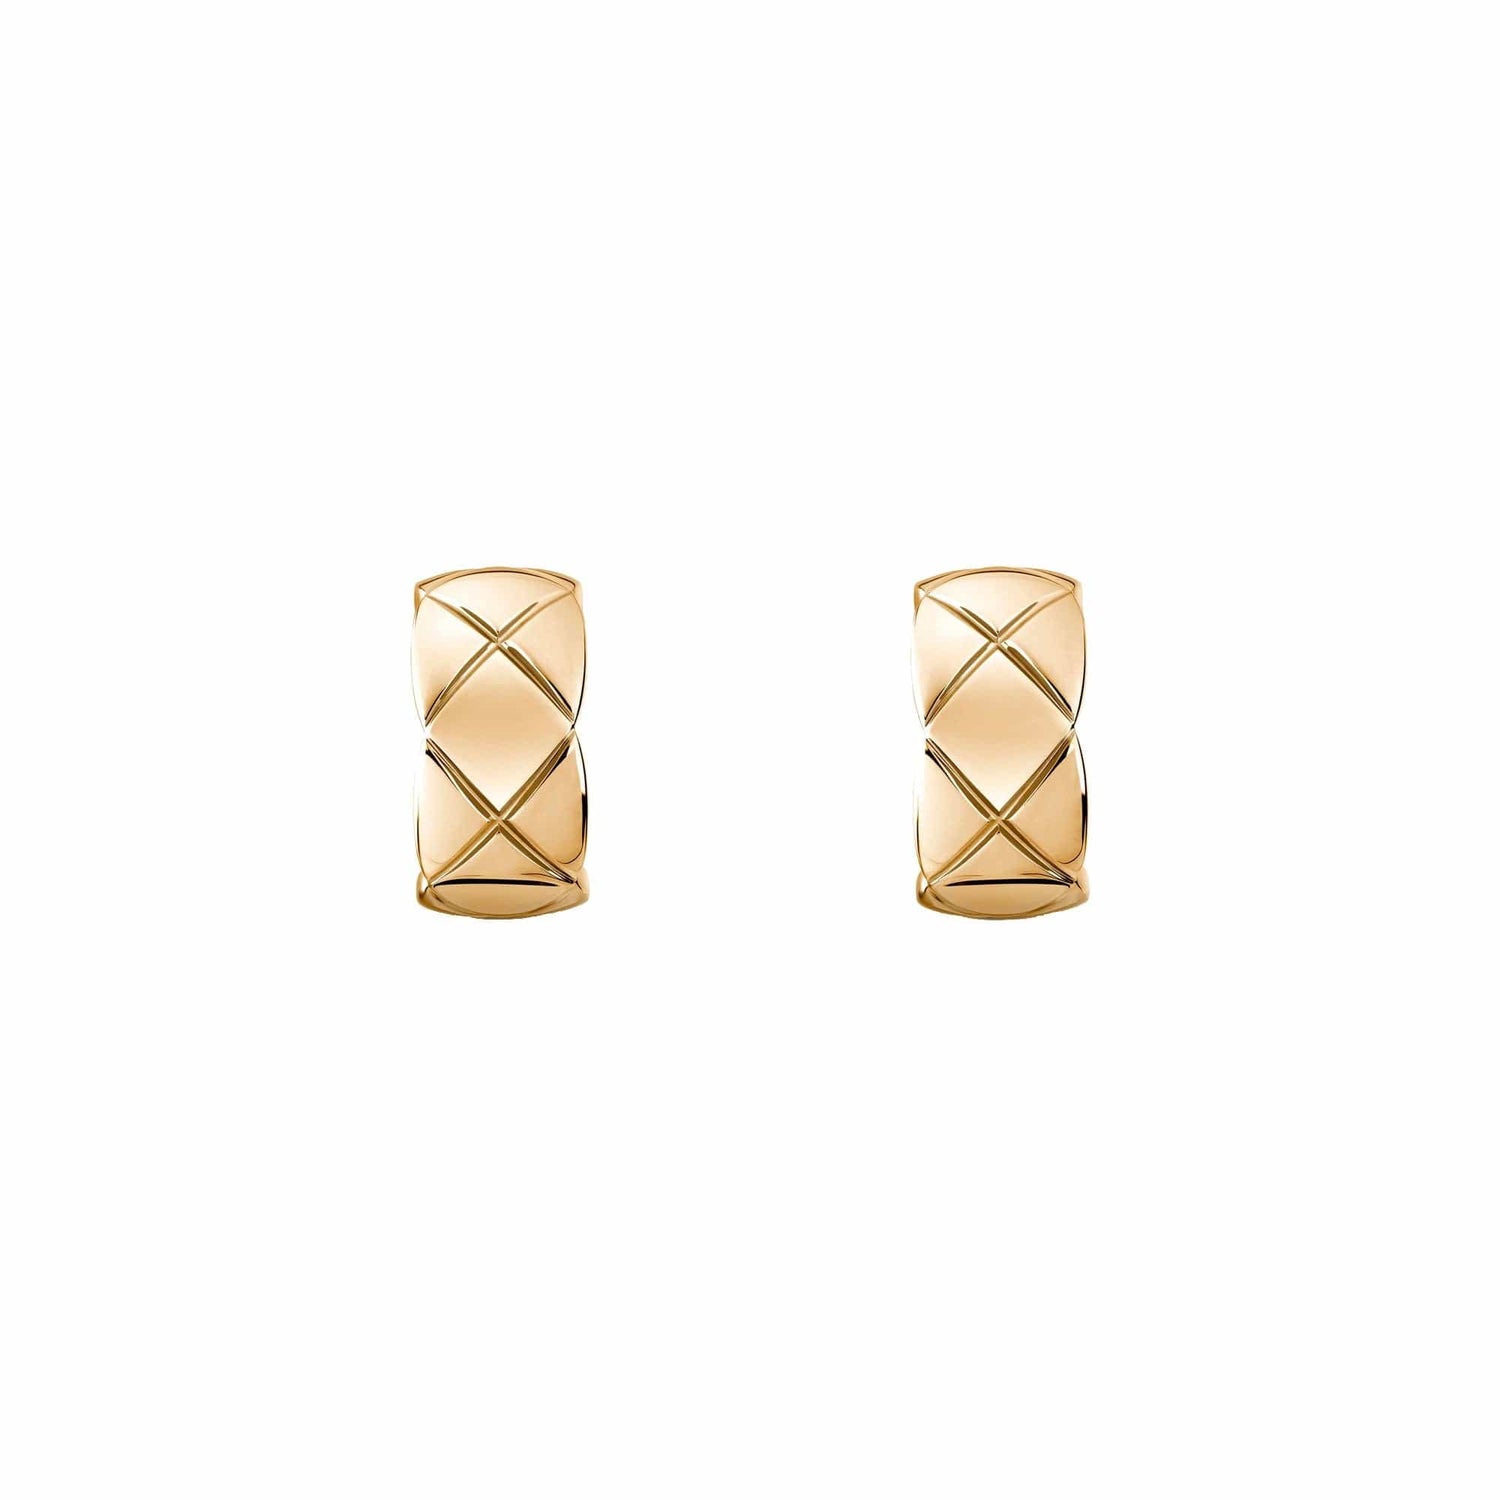 Coco Crush Earrings by Chanel